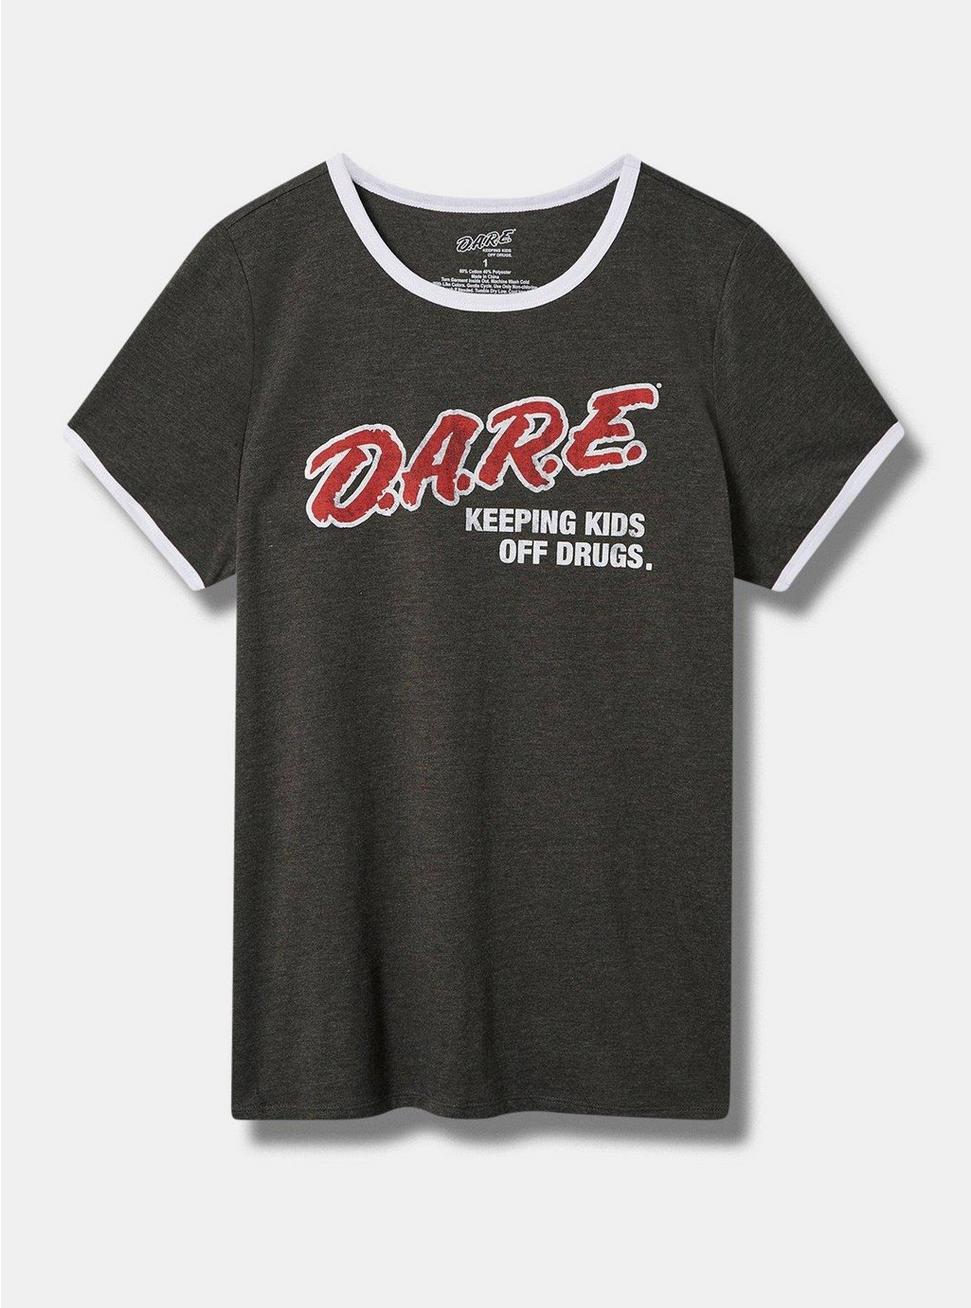 Dare Classic Fit Cotton Crew Tee, CHARCOAL HEATHER, hi-res